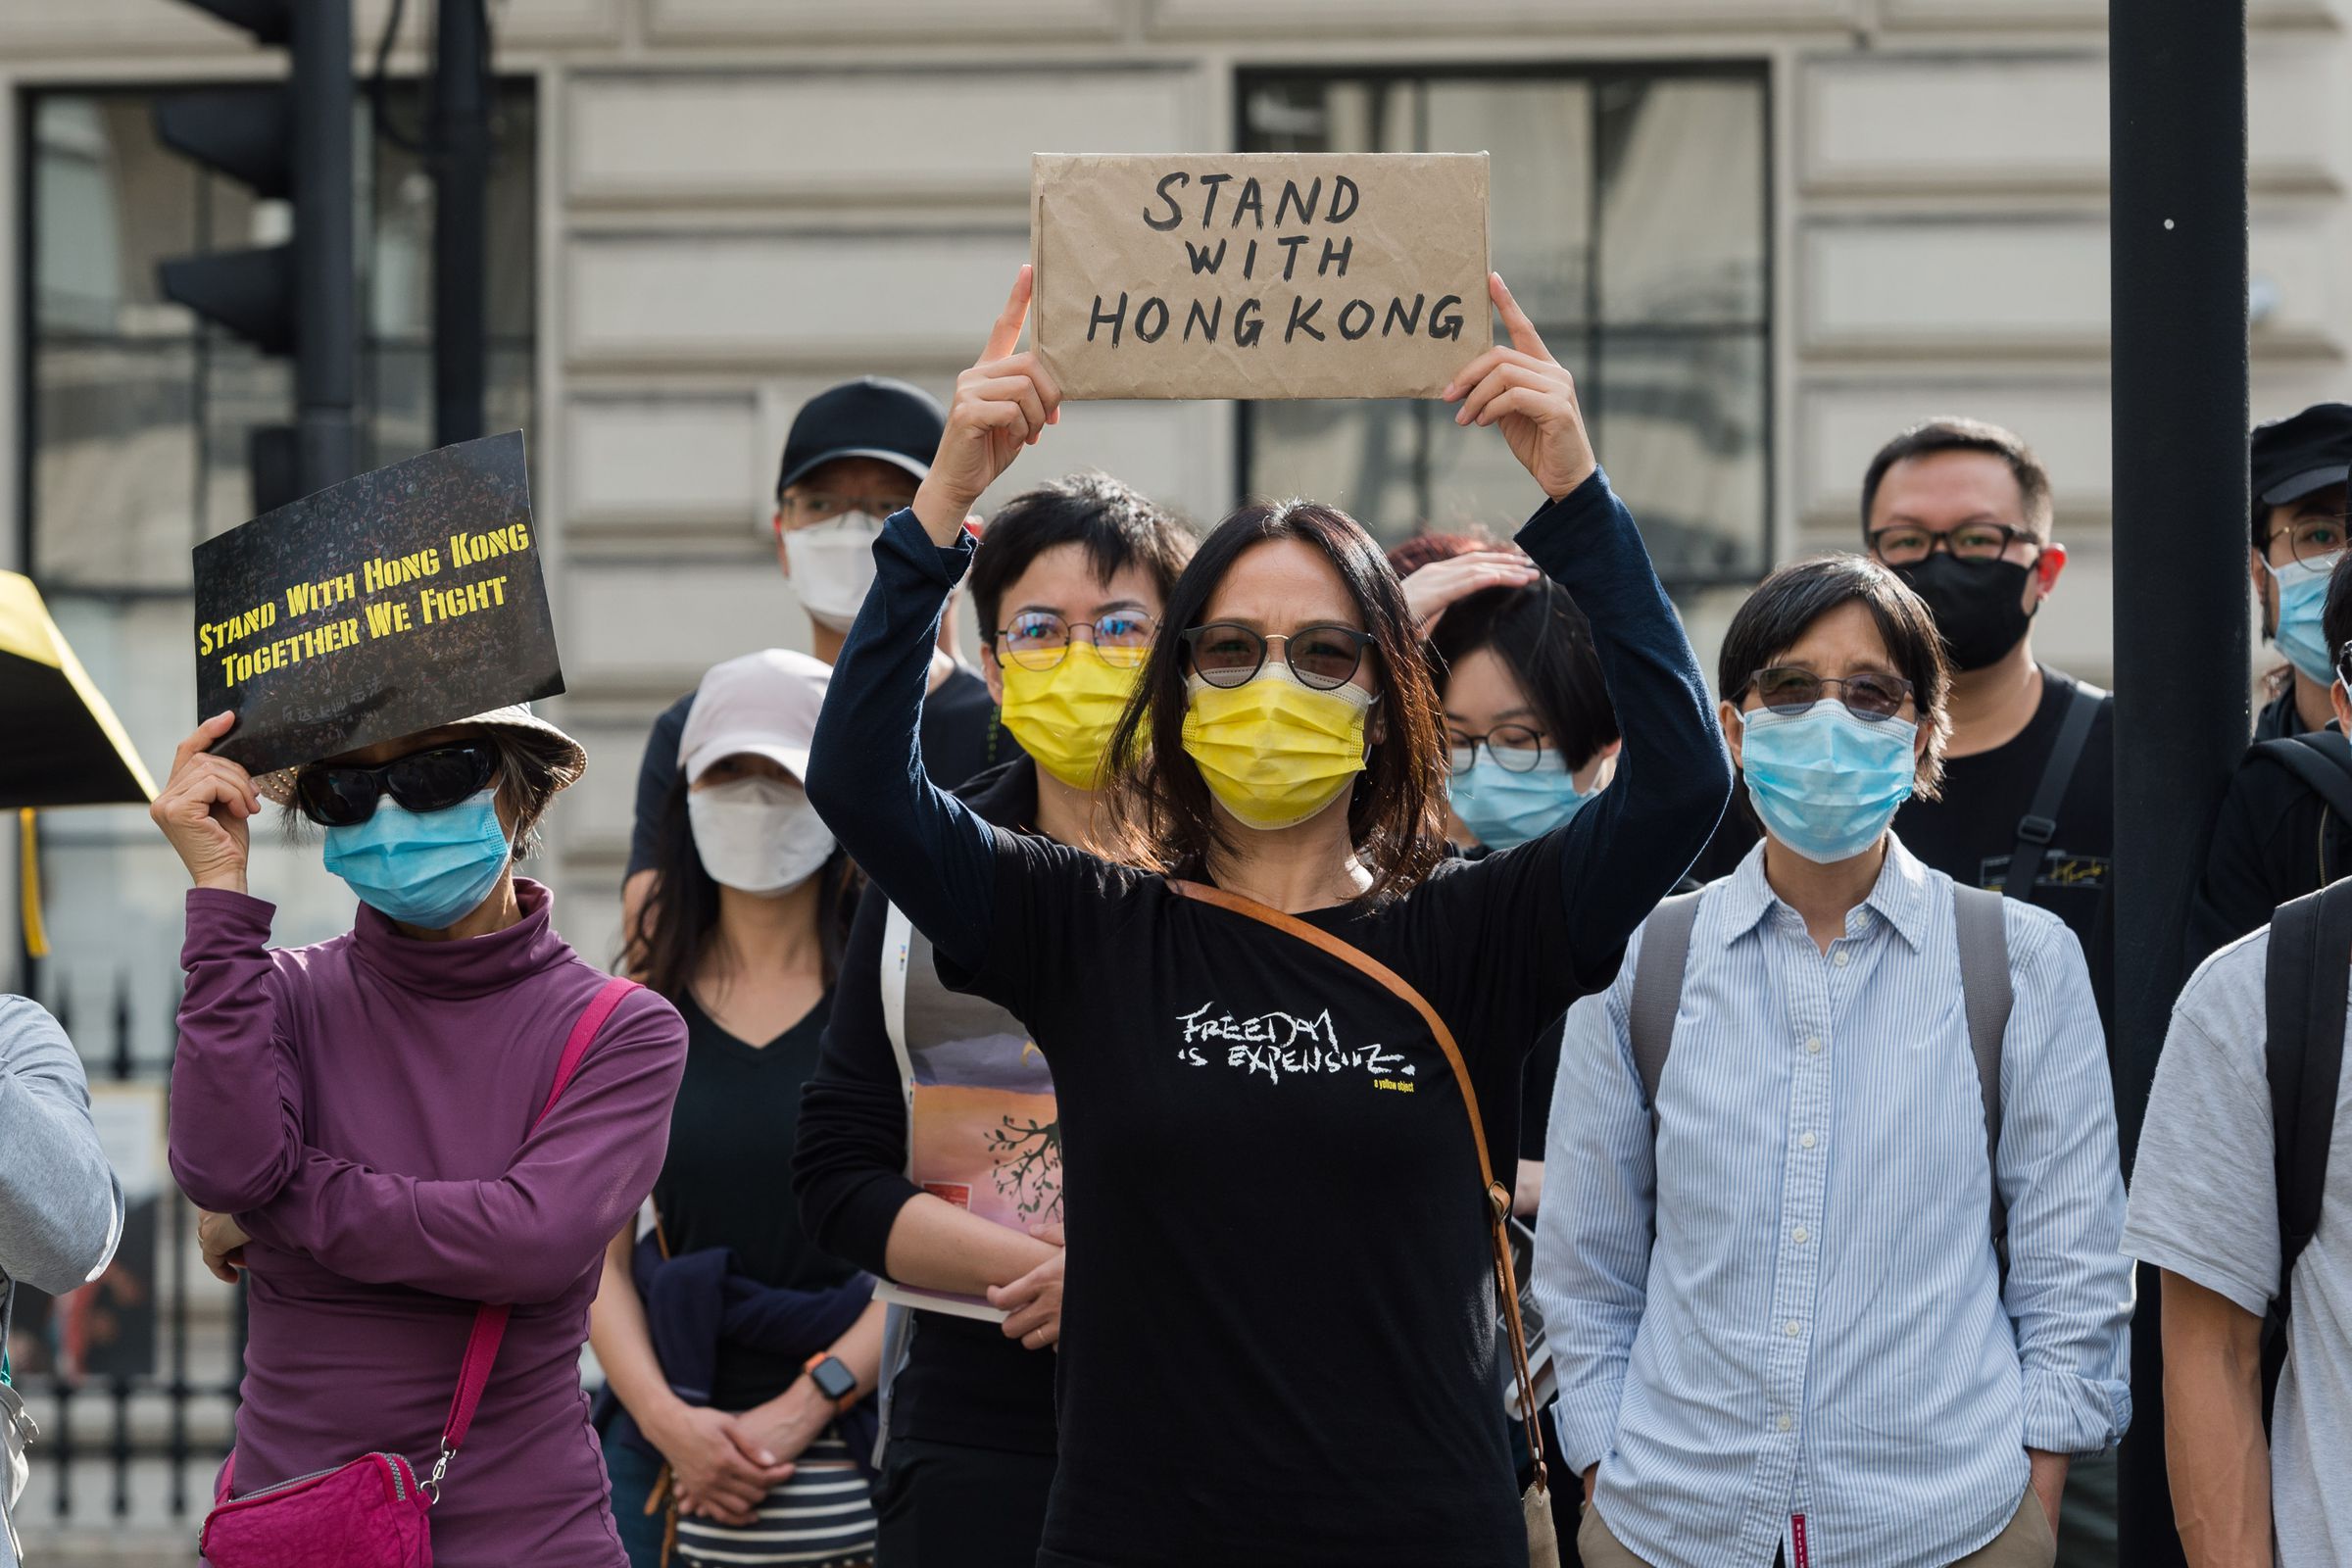 A crowd of people wearing facemasks hold up signs in support of Hong Kong.